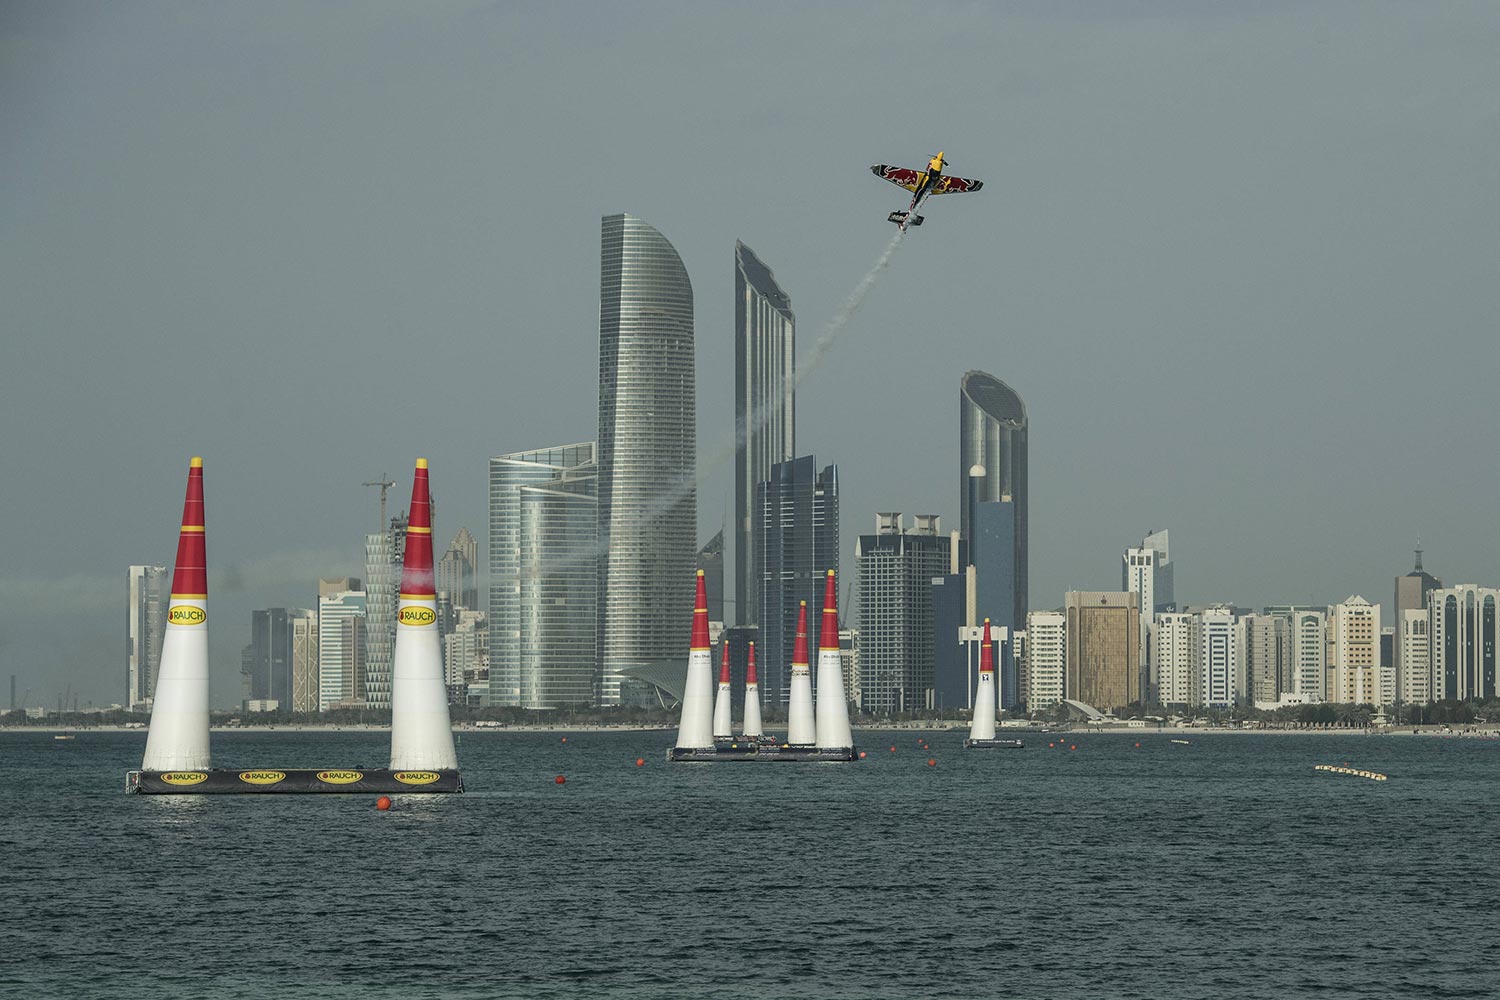 judging red bull air races with tech race abu dhabi 2  jeorg mitter redbull content pool